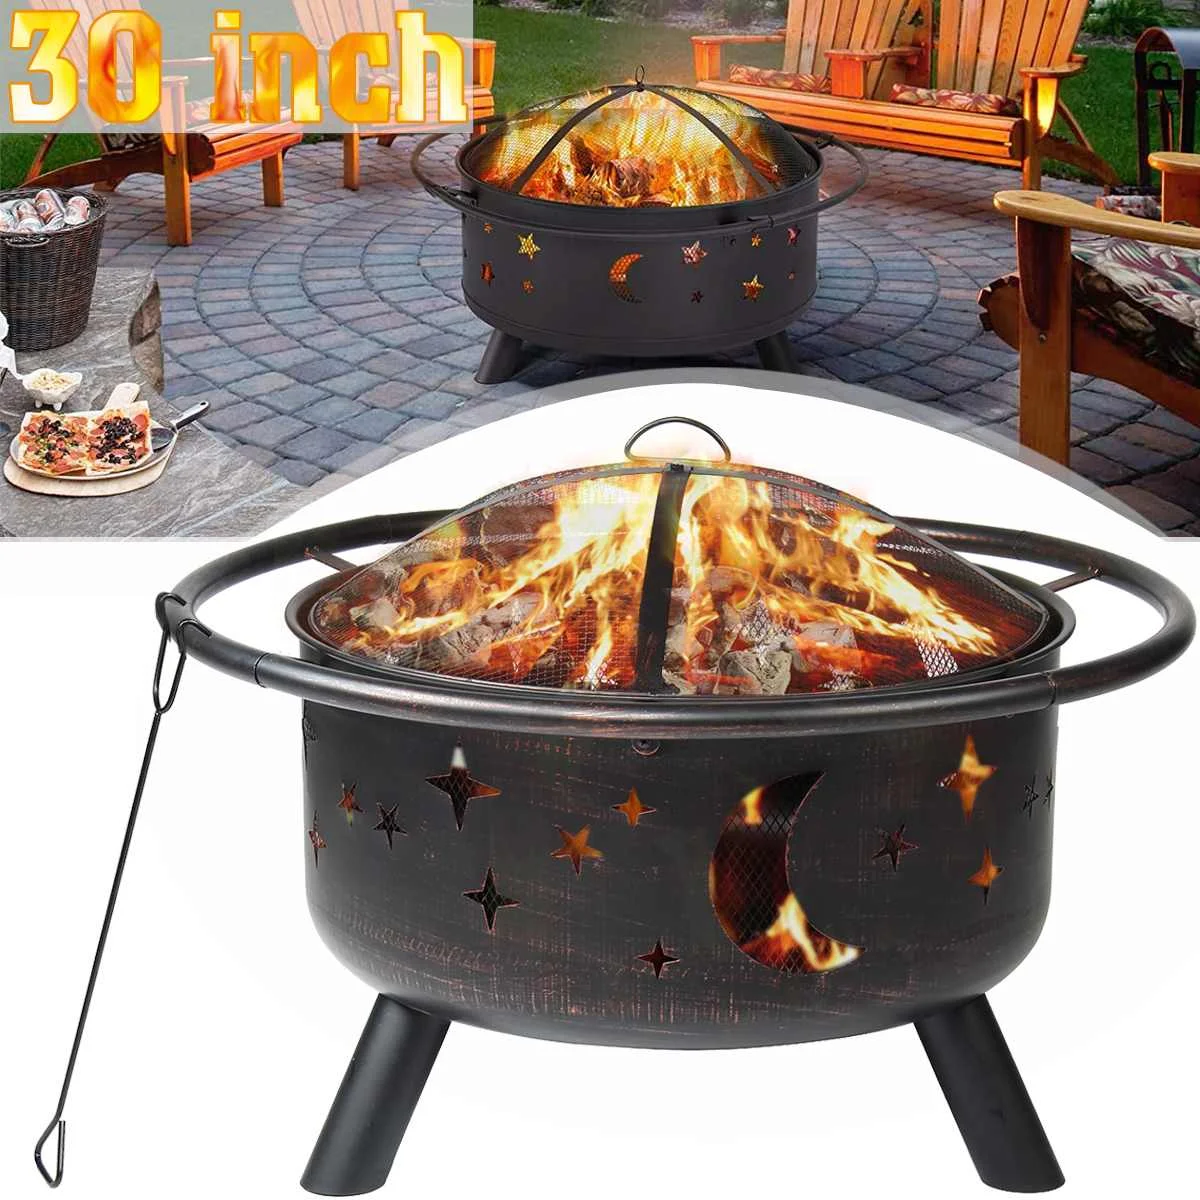 

30" Outdoor Fire Pit Wood Burning Steel BBQ Grill Firepit Bowl with Mesh Fire Pit Outdoor Fireplace for Backyard Camping Picnic